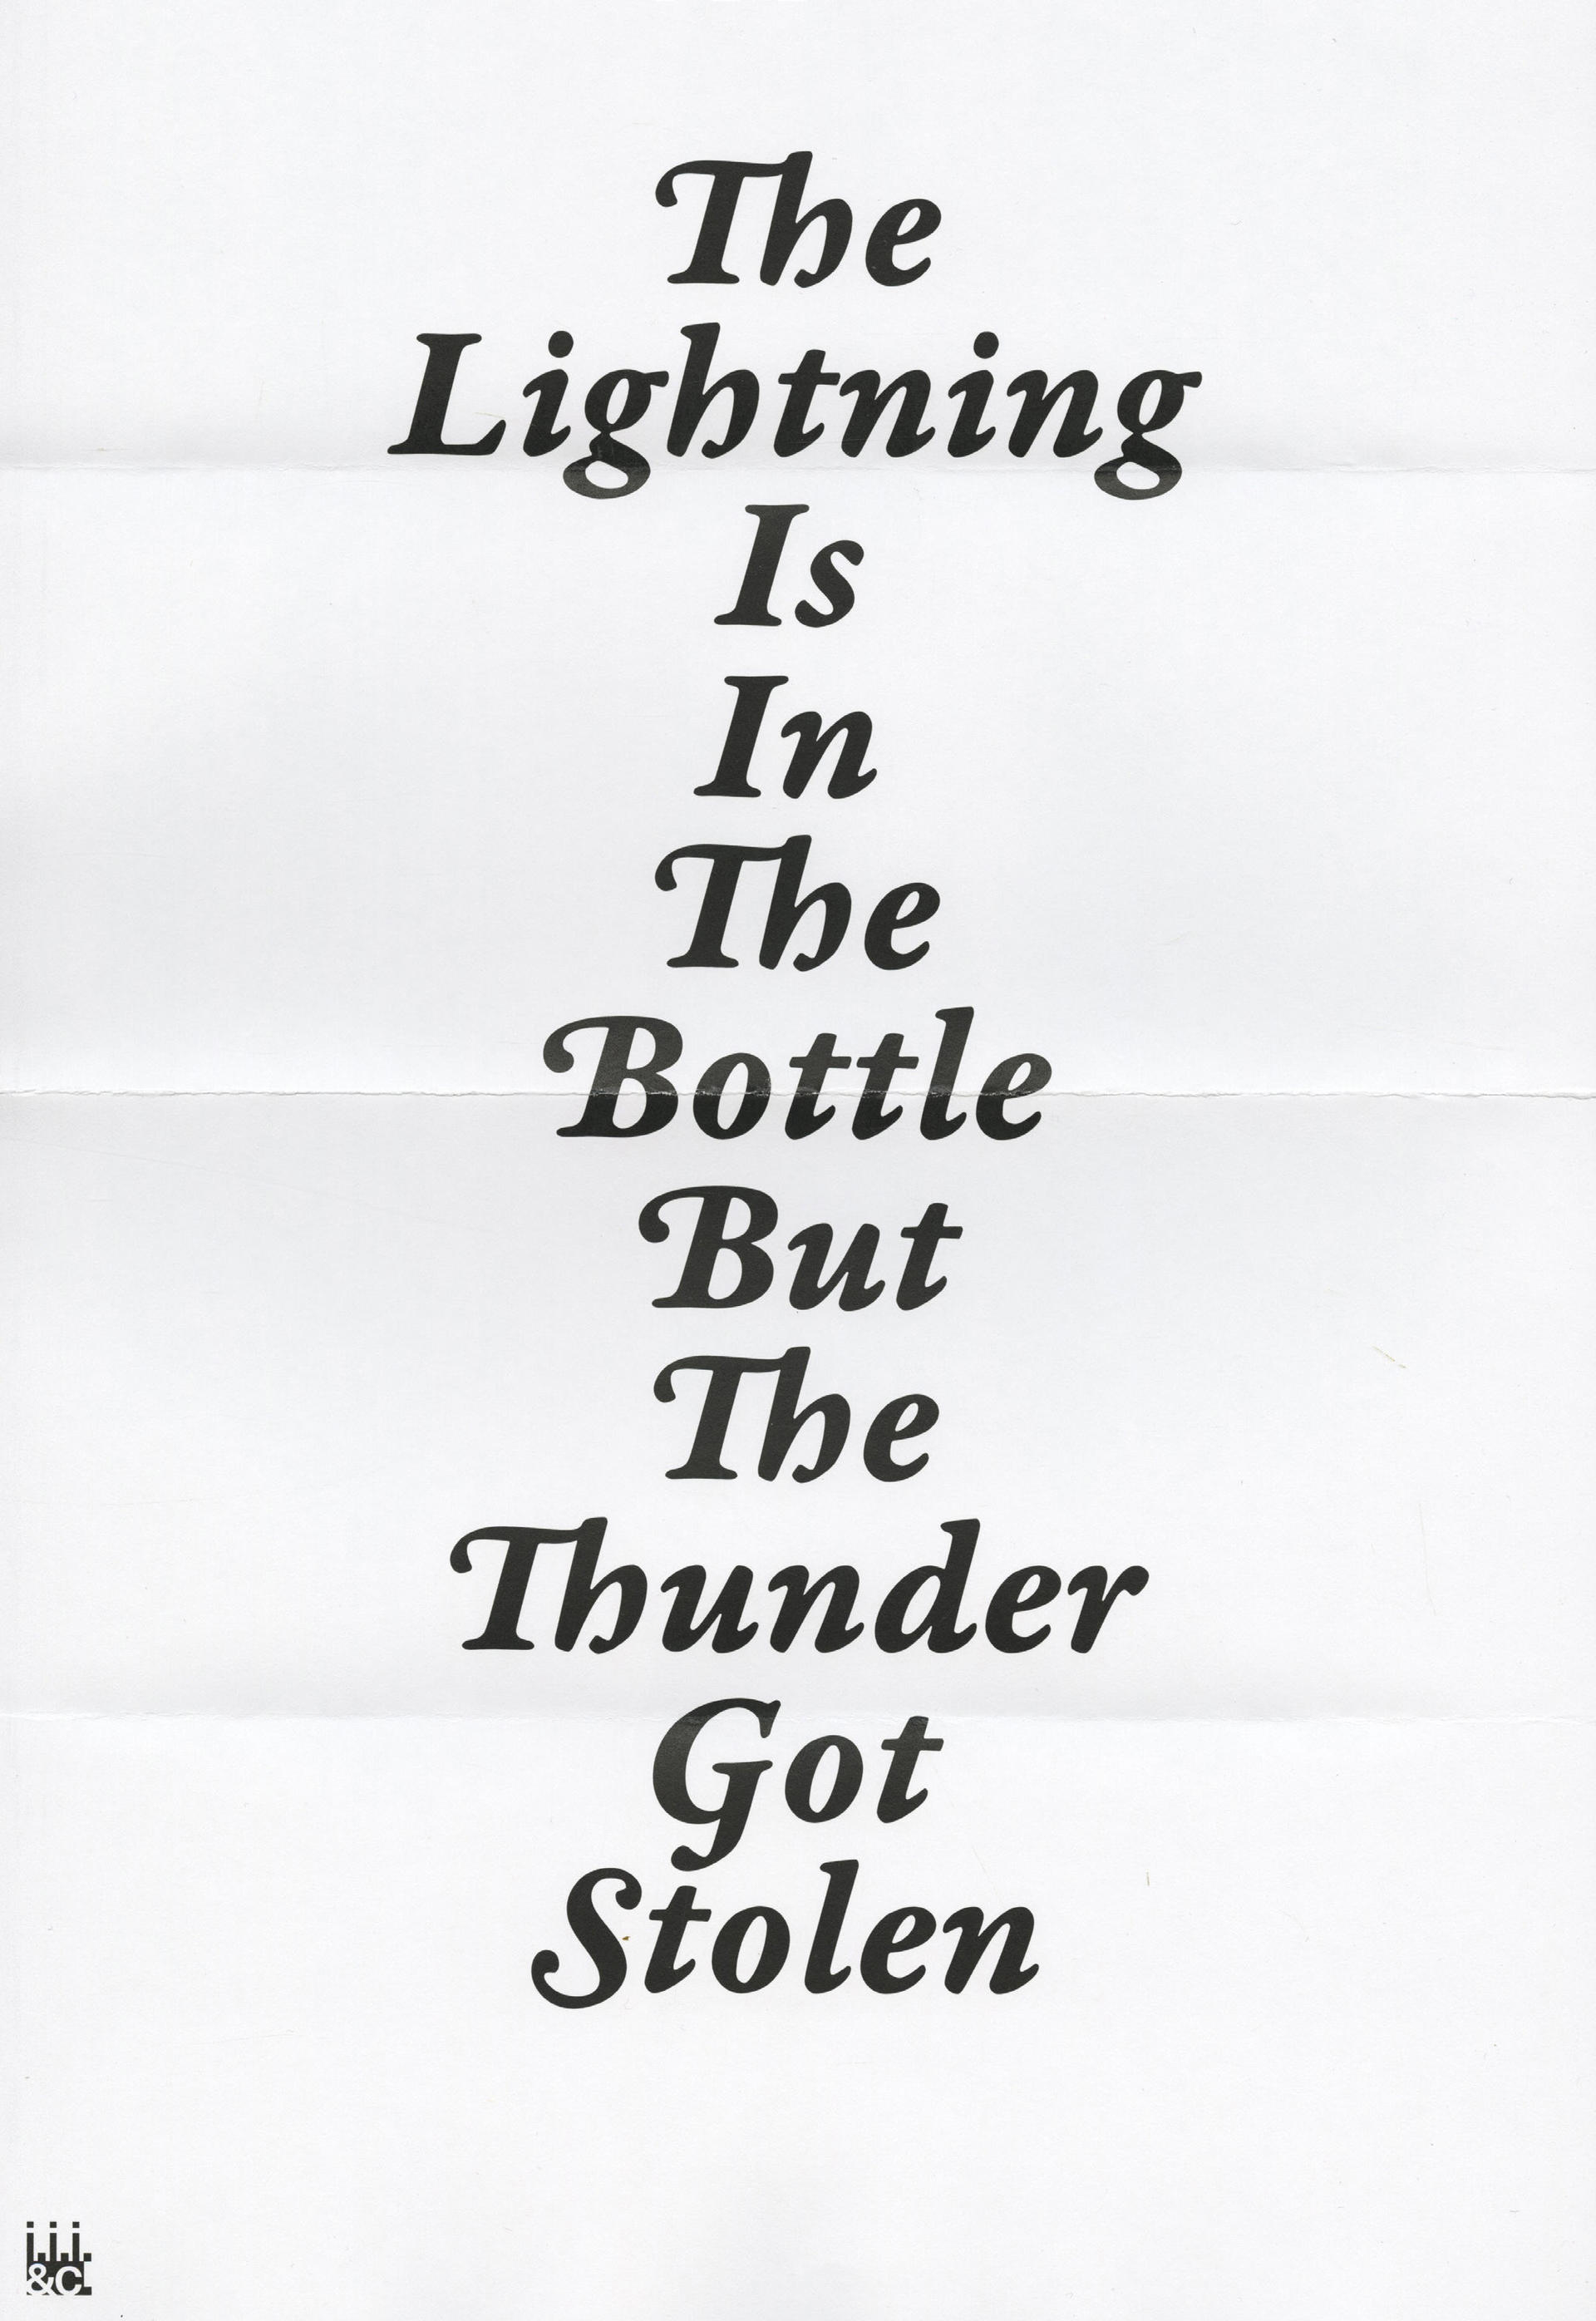 a poster with text that reads “The Lightning Is In The Bottle But The Thunder Got Stolen”